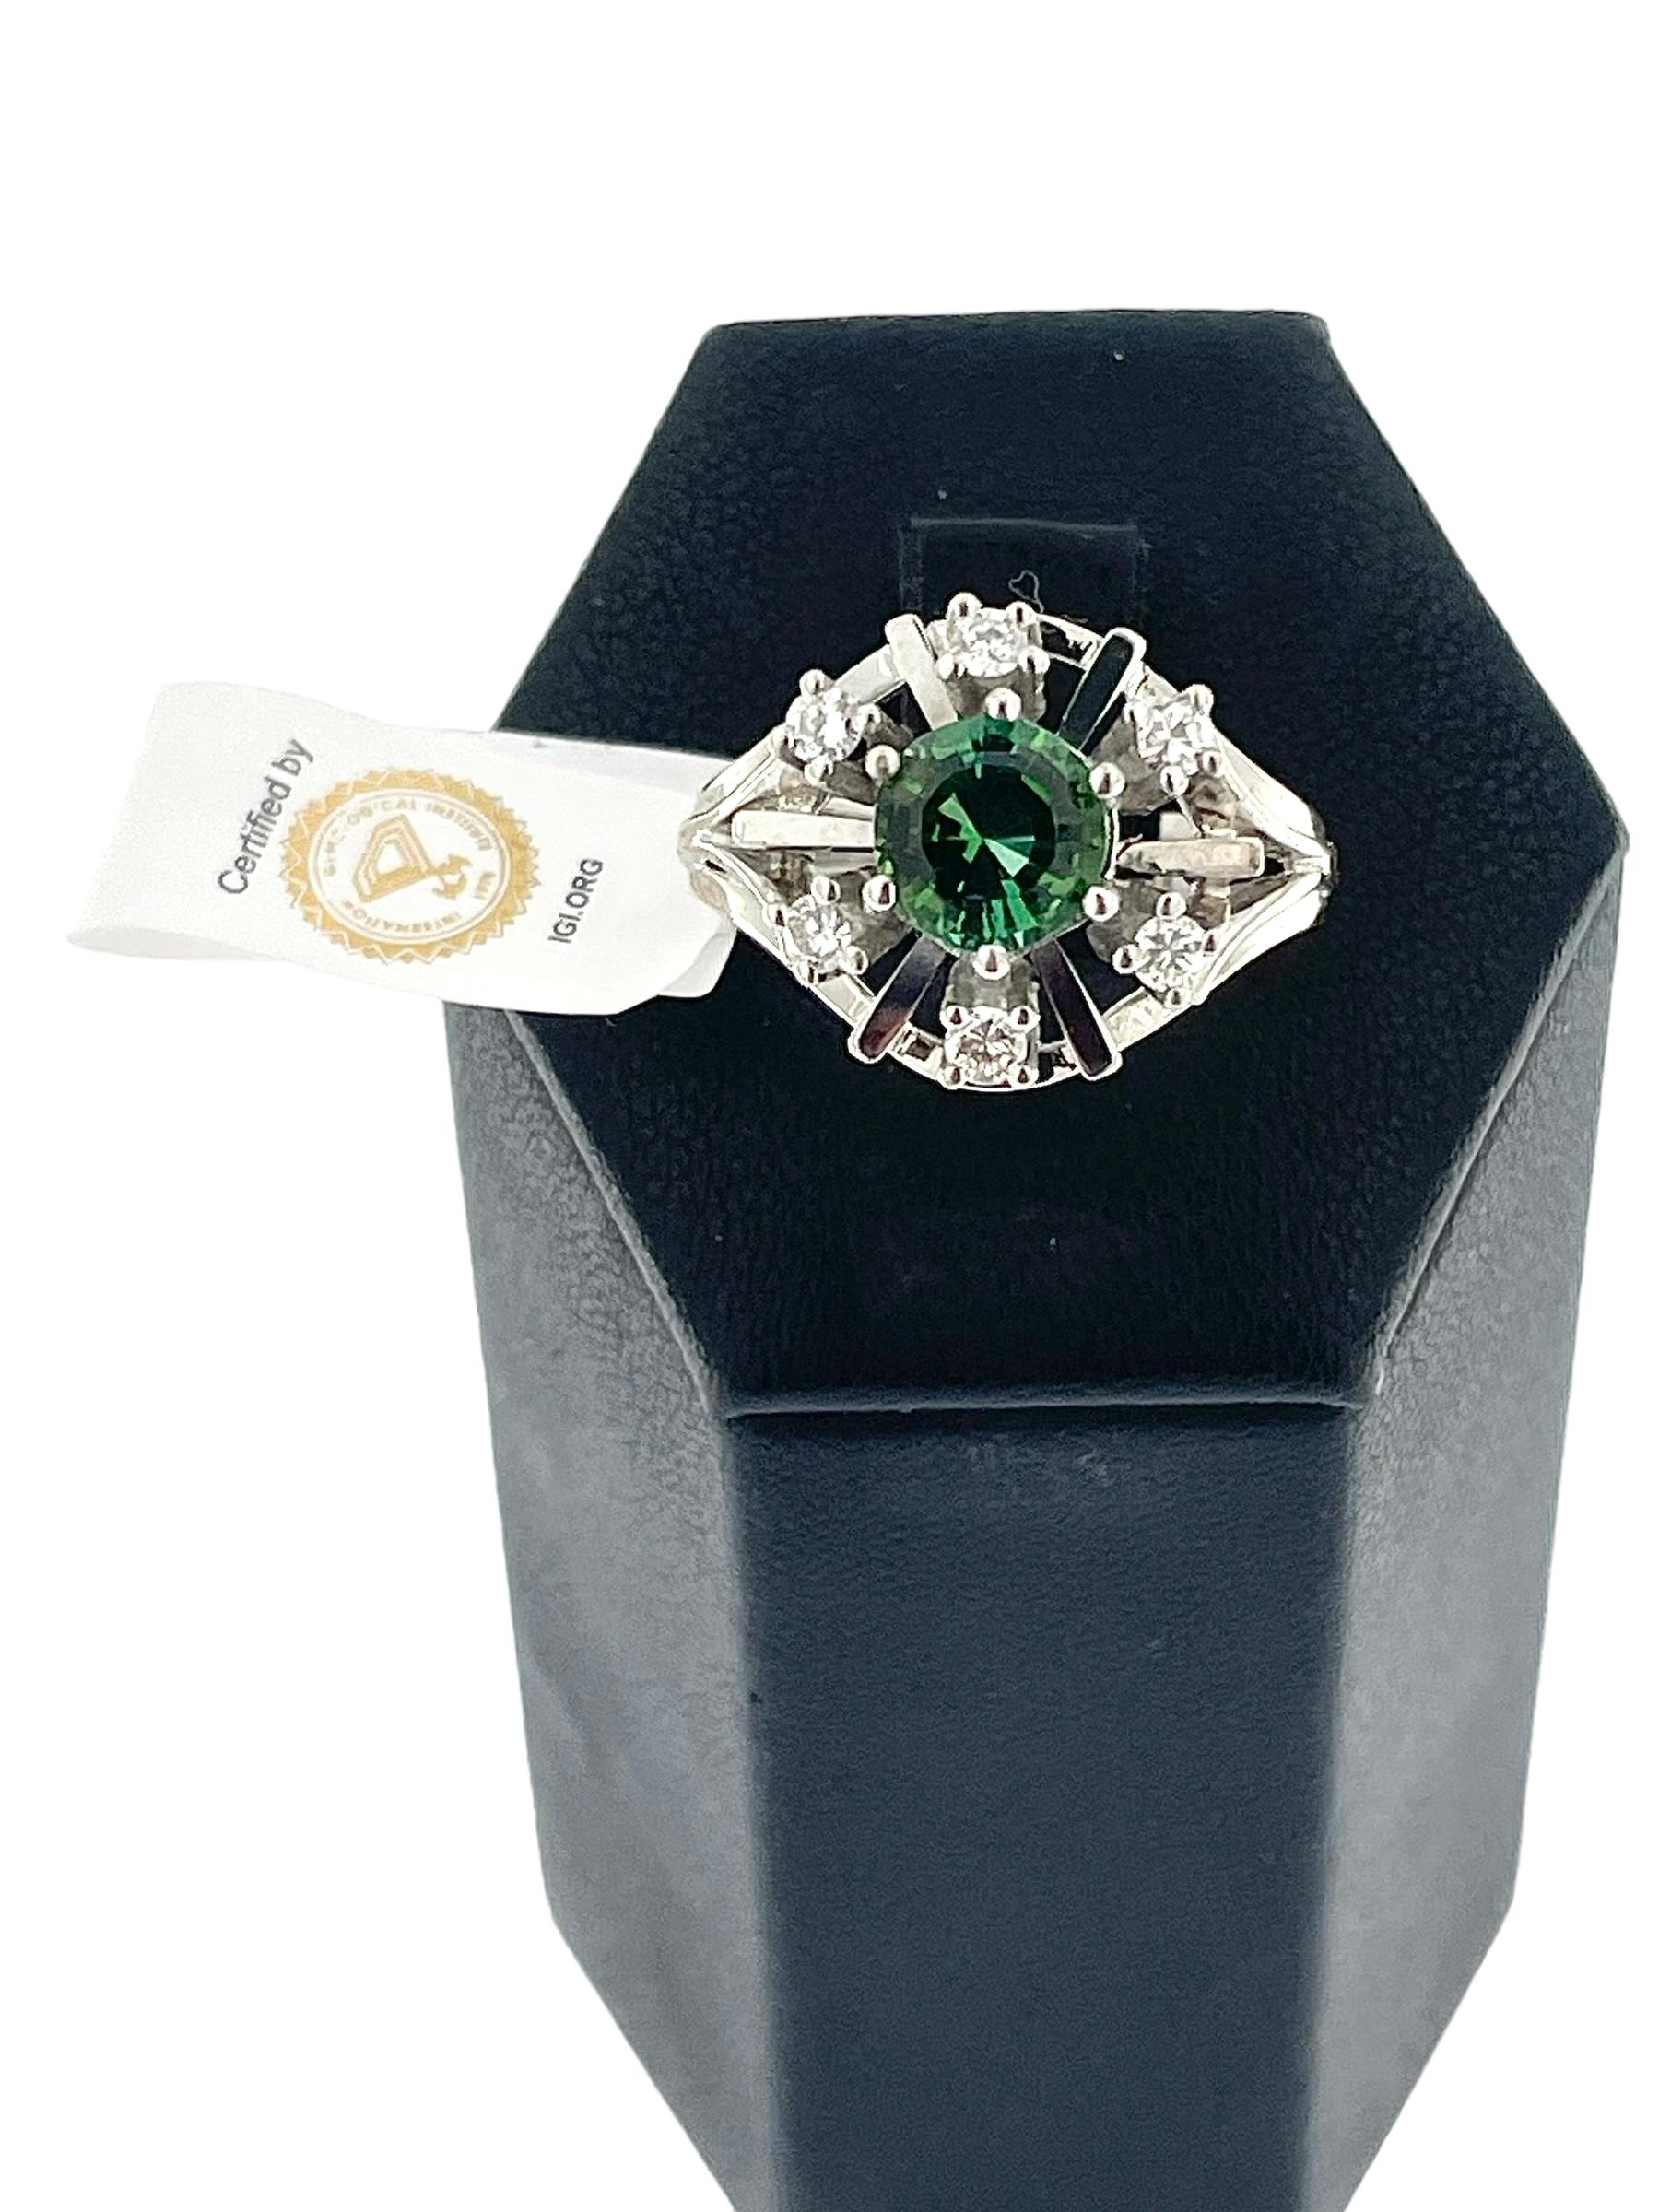 IGI Certified White Gold Ring with Verdelite Tourmaline and Diamonds In Good Condition For Sale In Esch-Sur-Alzette, LU